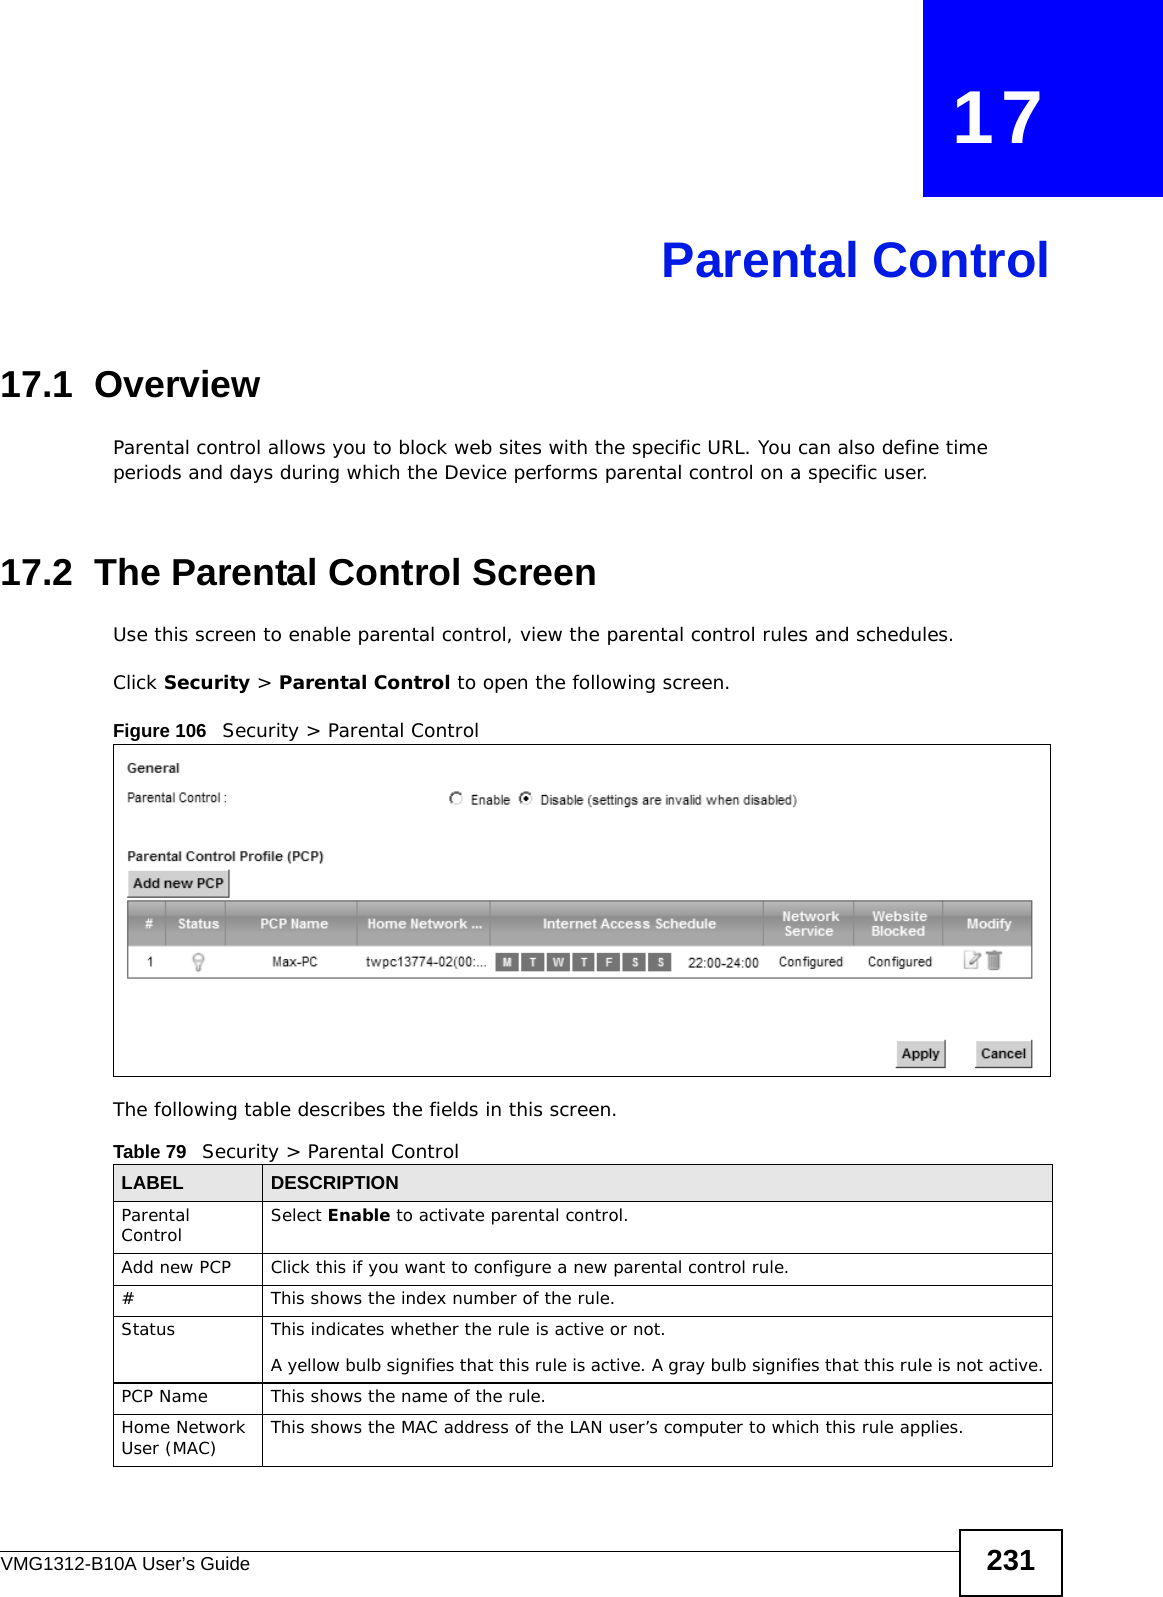 VMG1312-B10A User’s Guide 231CHAPTER   17Parental Control17.1  OverviewParental control allows you to block web sites with the specific URL. You can also define time periods and days during which the Device performs parental control on a specific user. 17.2  The Parental Control ScreenUse this screen to enable parental control, view the parental control rules and schedules.Click Security &gt; Parental Control to open the following screen. Figure 106   Security &gt; Parental Control The following table describes the fields in this screen. Table 79   Security &gt; Parental ControlLABEL DESCRIPTIONParental Control Select Enable to activate parental control.Add new PCP Click this if you want to configure a new parental control rule.#This shows the index number of the rule.Status This indicates whether the rule is active or not.A yellow bulb signifies that this rule is active. A gray bulb signifies that this rule is not active.PCP Name This shows the name of the rule.Home Network User (MAC) This shows the MAC address of the LAN user’s computer to which this rule applies.